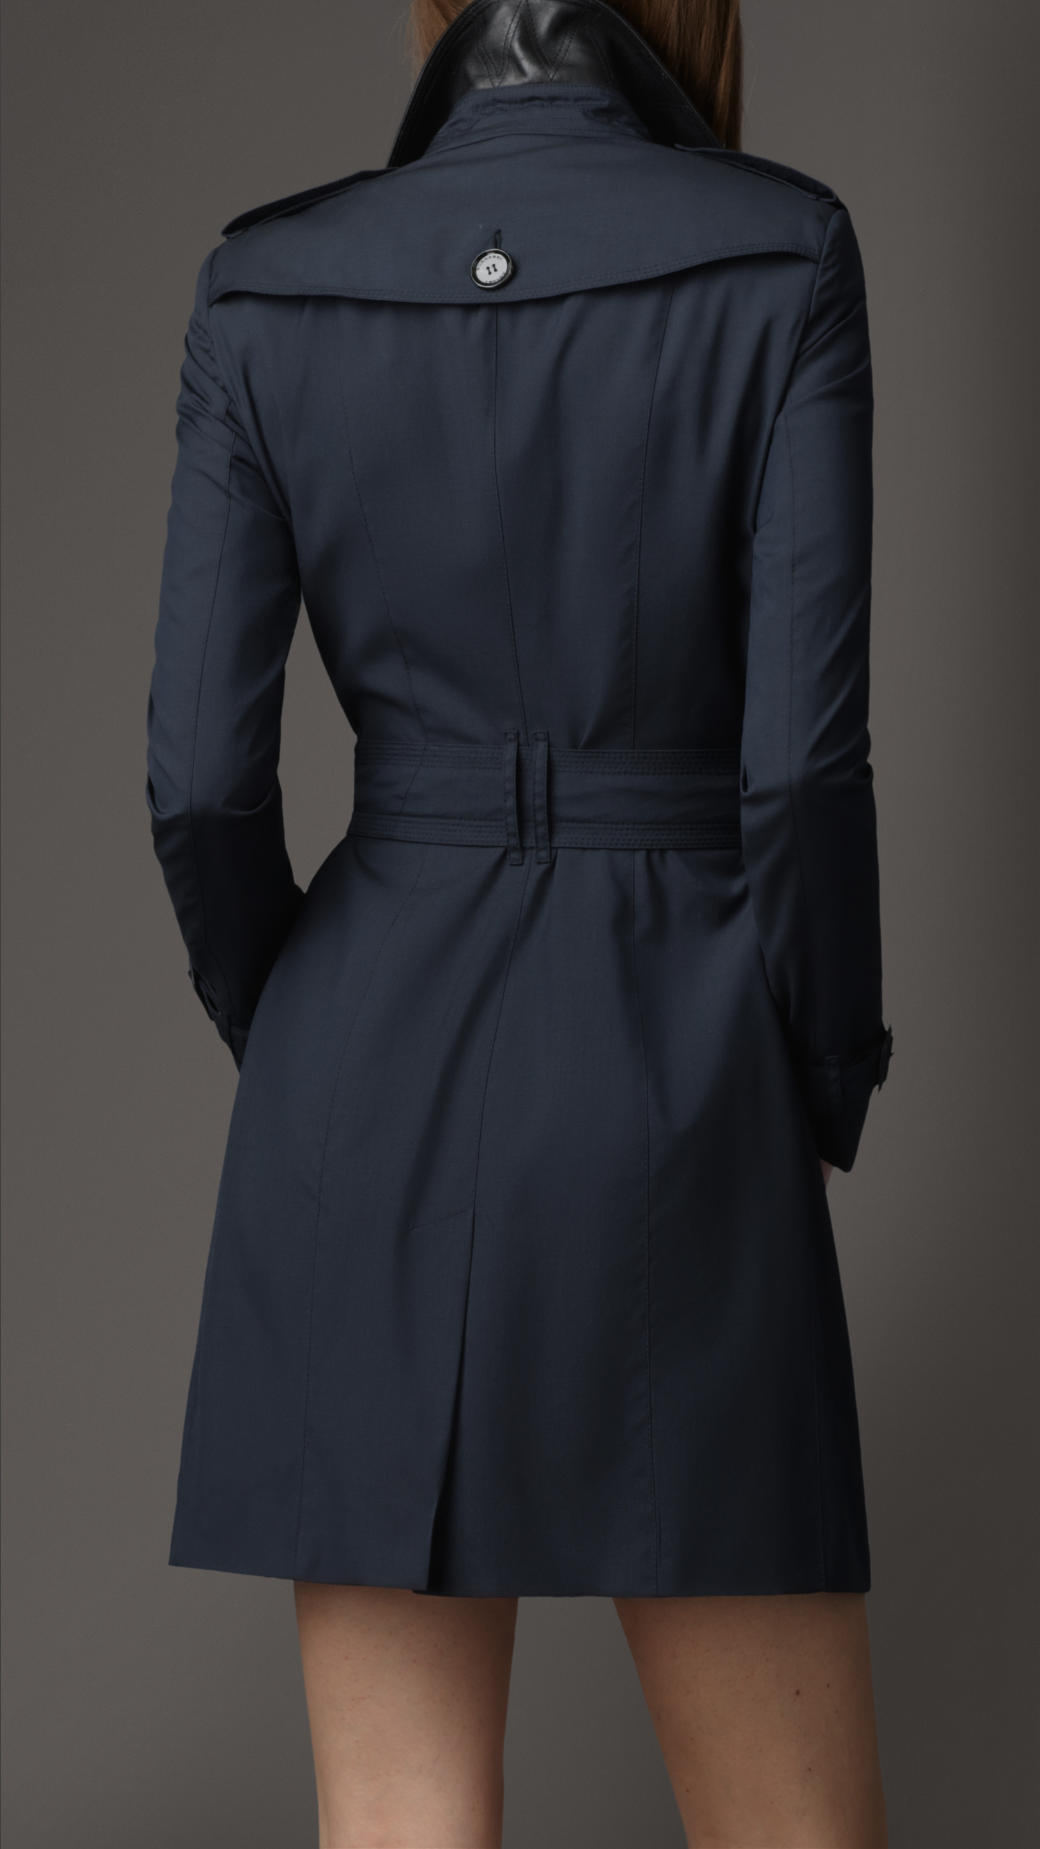 Burberry Wool Silk Trench Coat in Navy (Blue) - Lyst